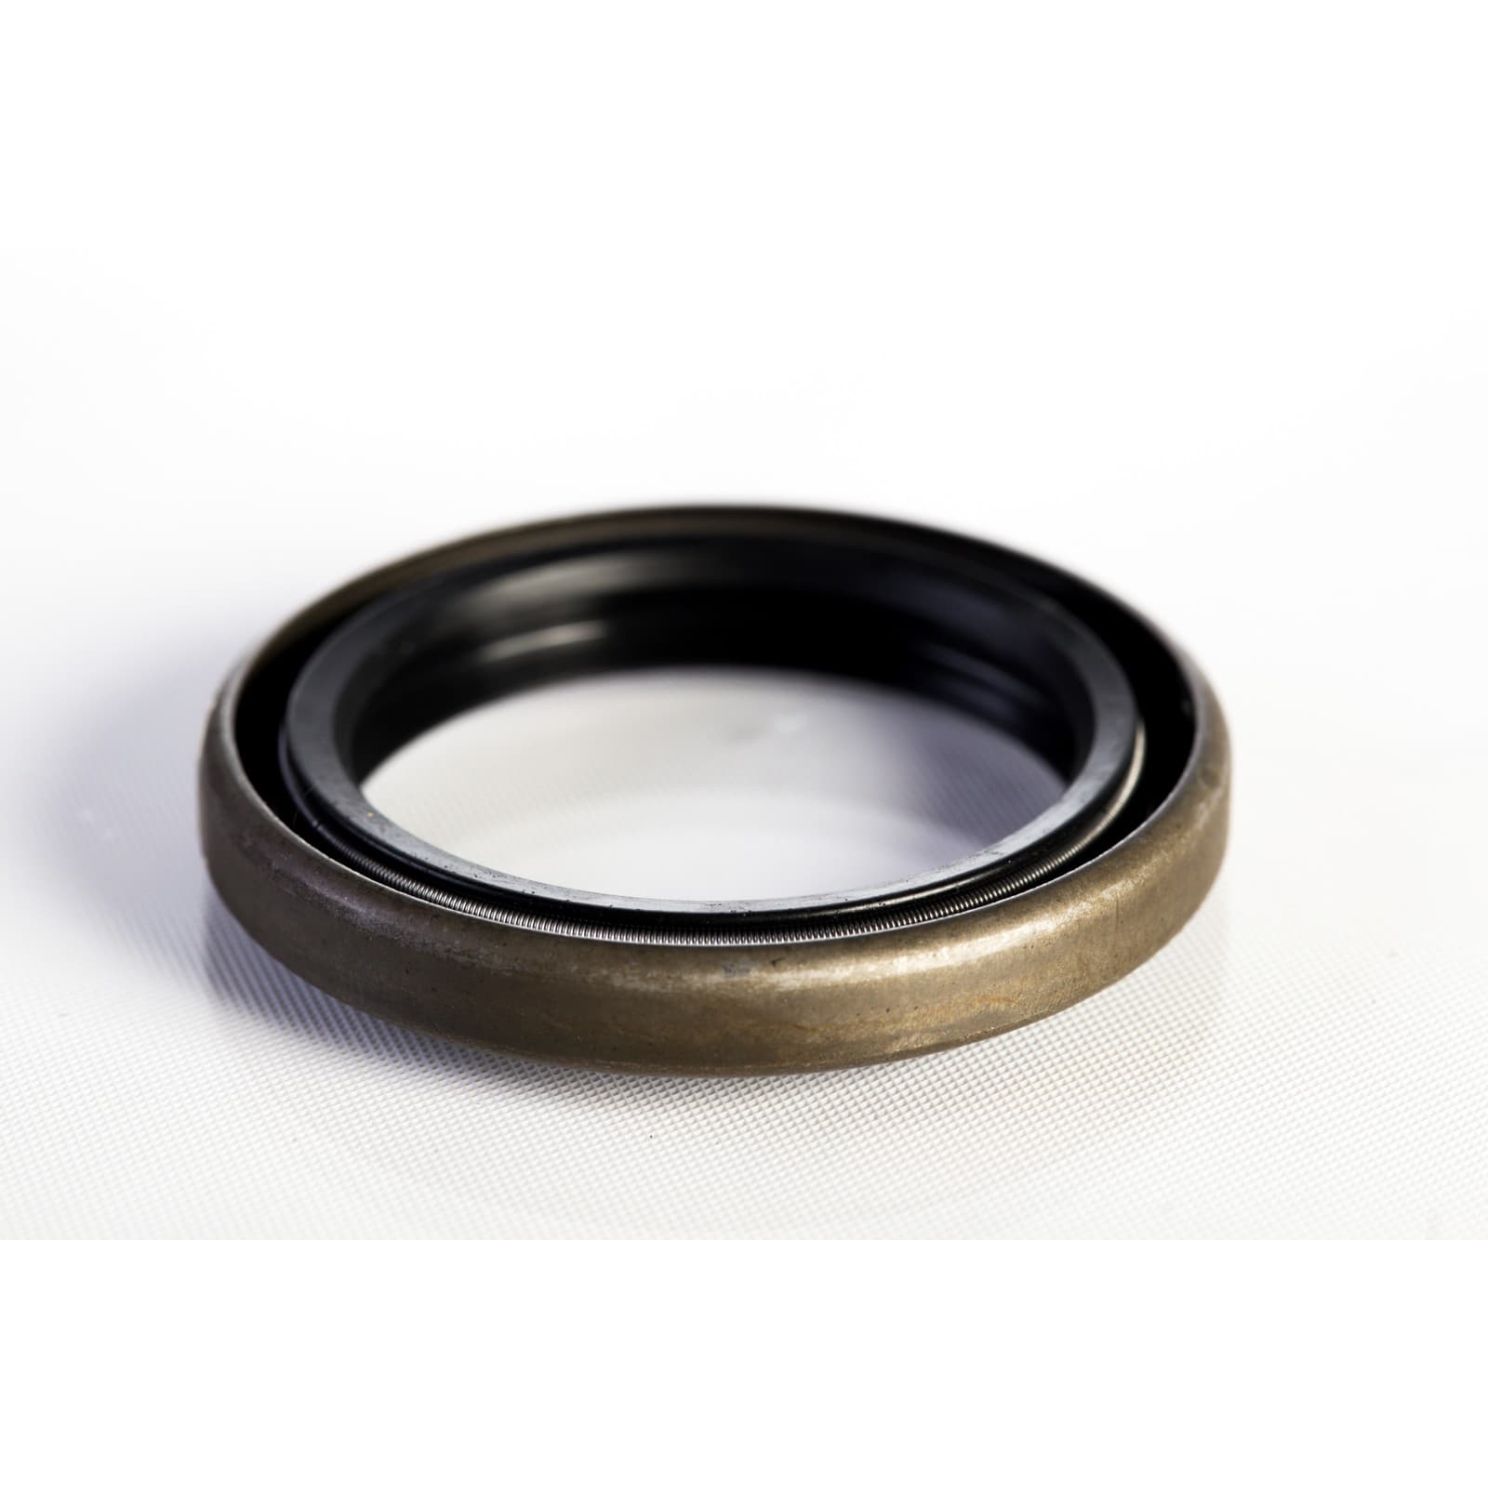 A53134 Planter Residue Manager Hub Seal fits John Deere